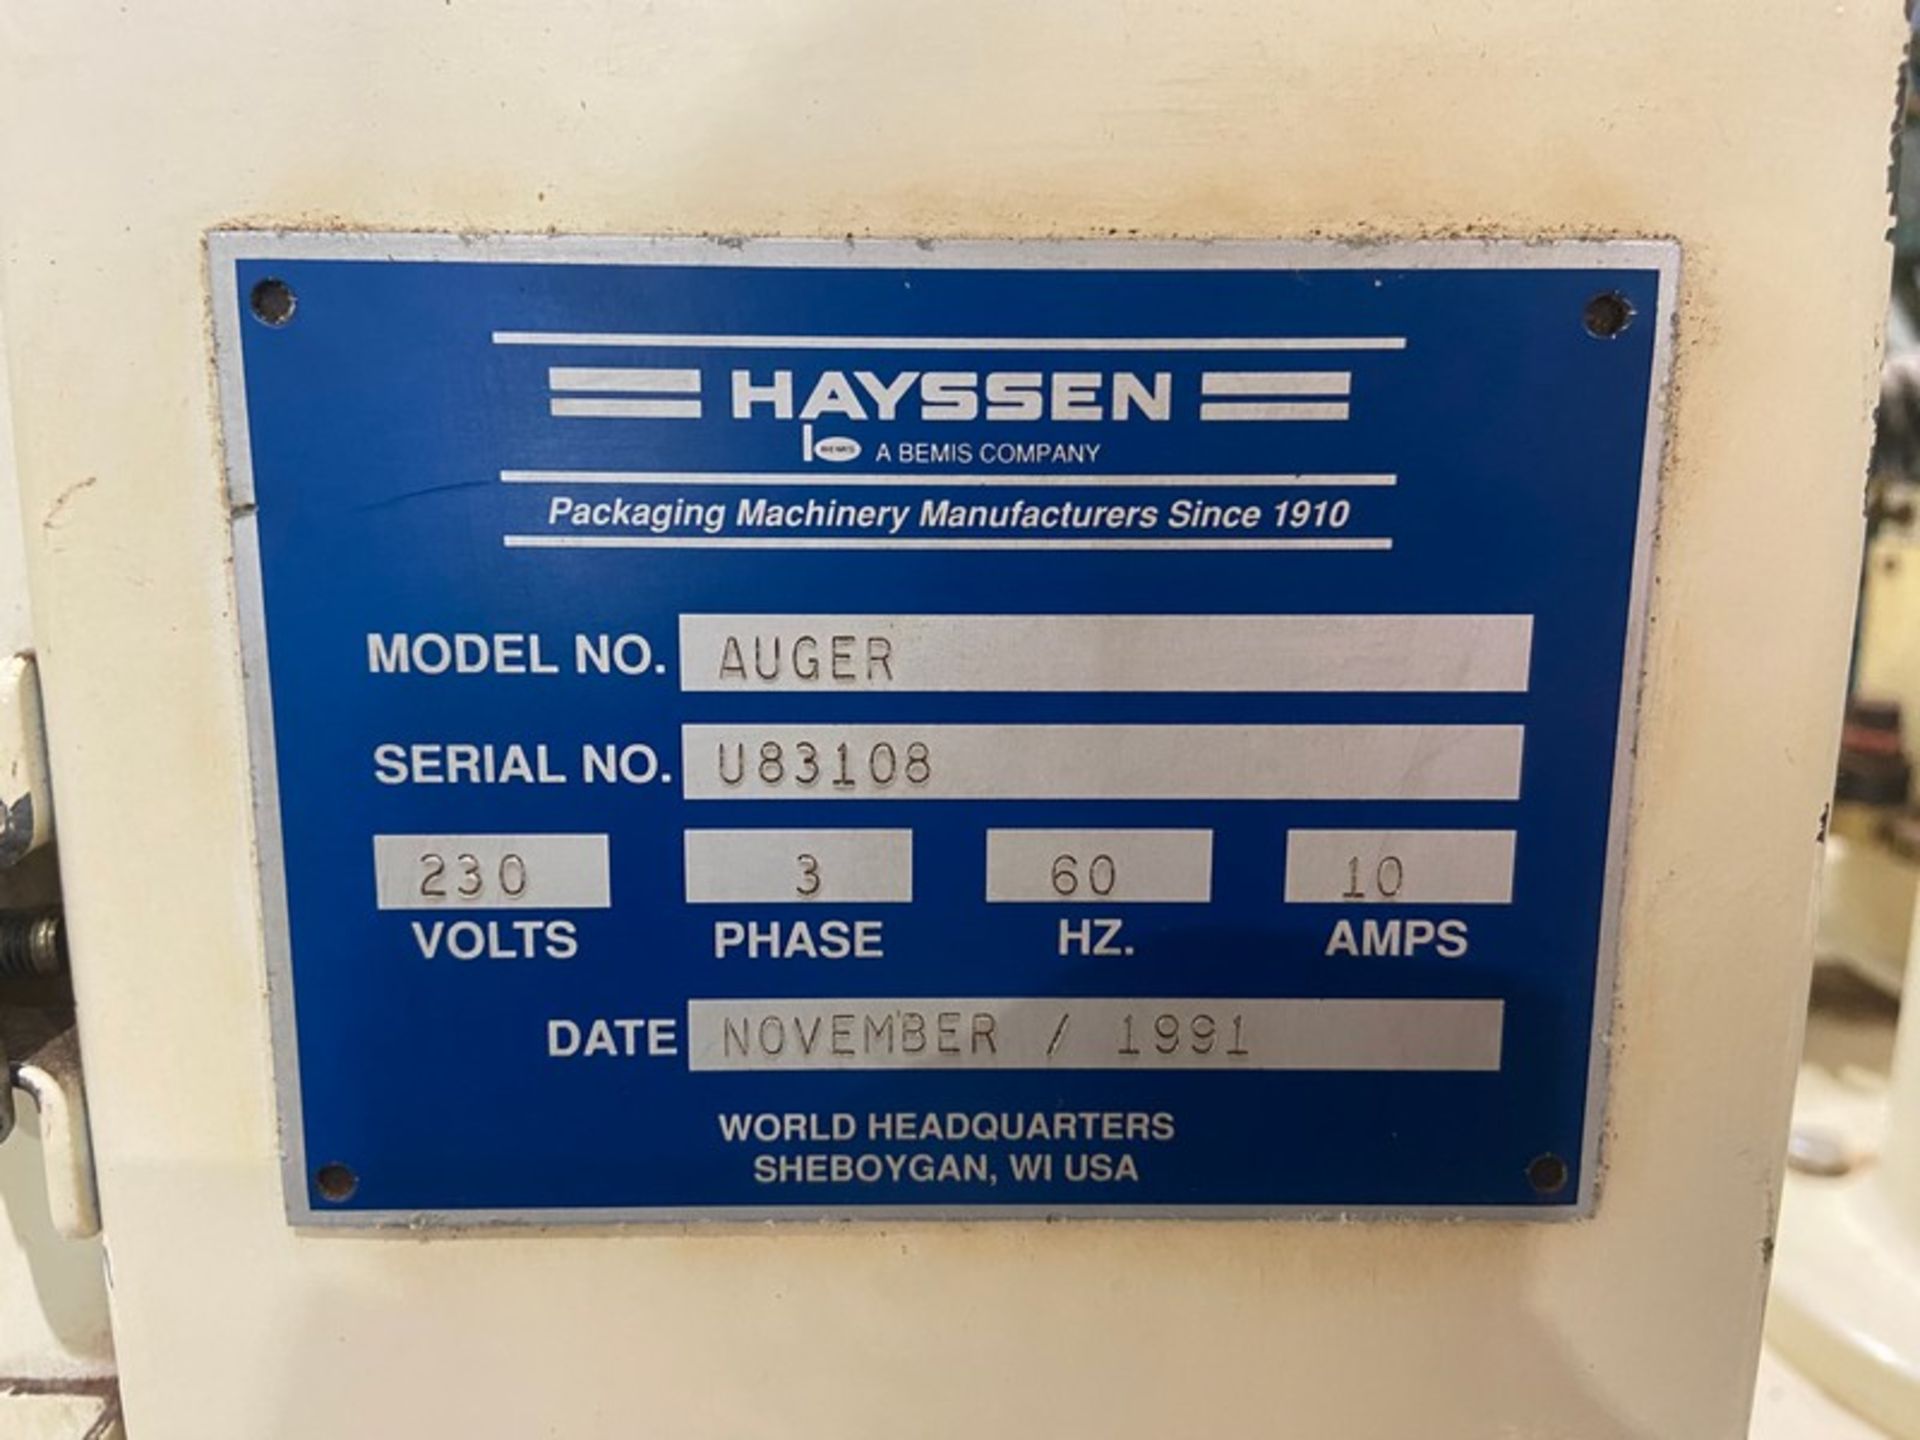 Hayssen VFFS, M/N 8-12HR COFFEEMAX, S/N U83108, 115 Volts, 3 Phase, with Forming Tube, with Mateer- - Image 14 of 15